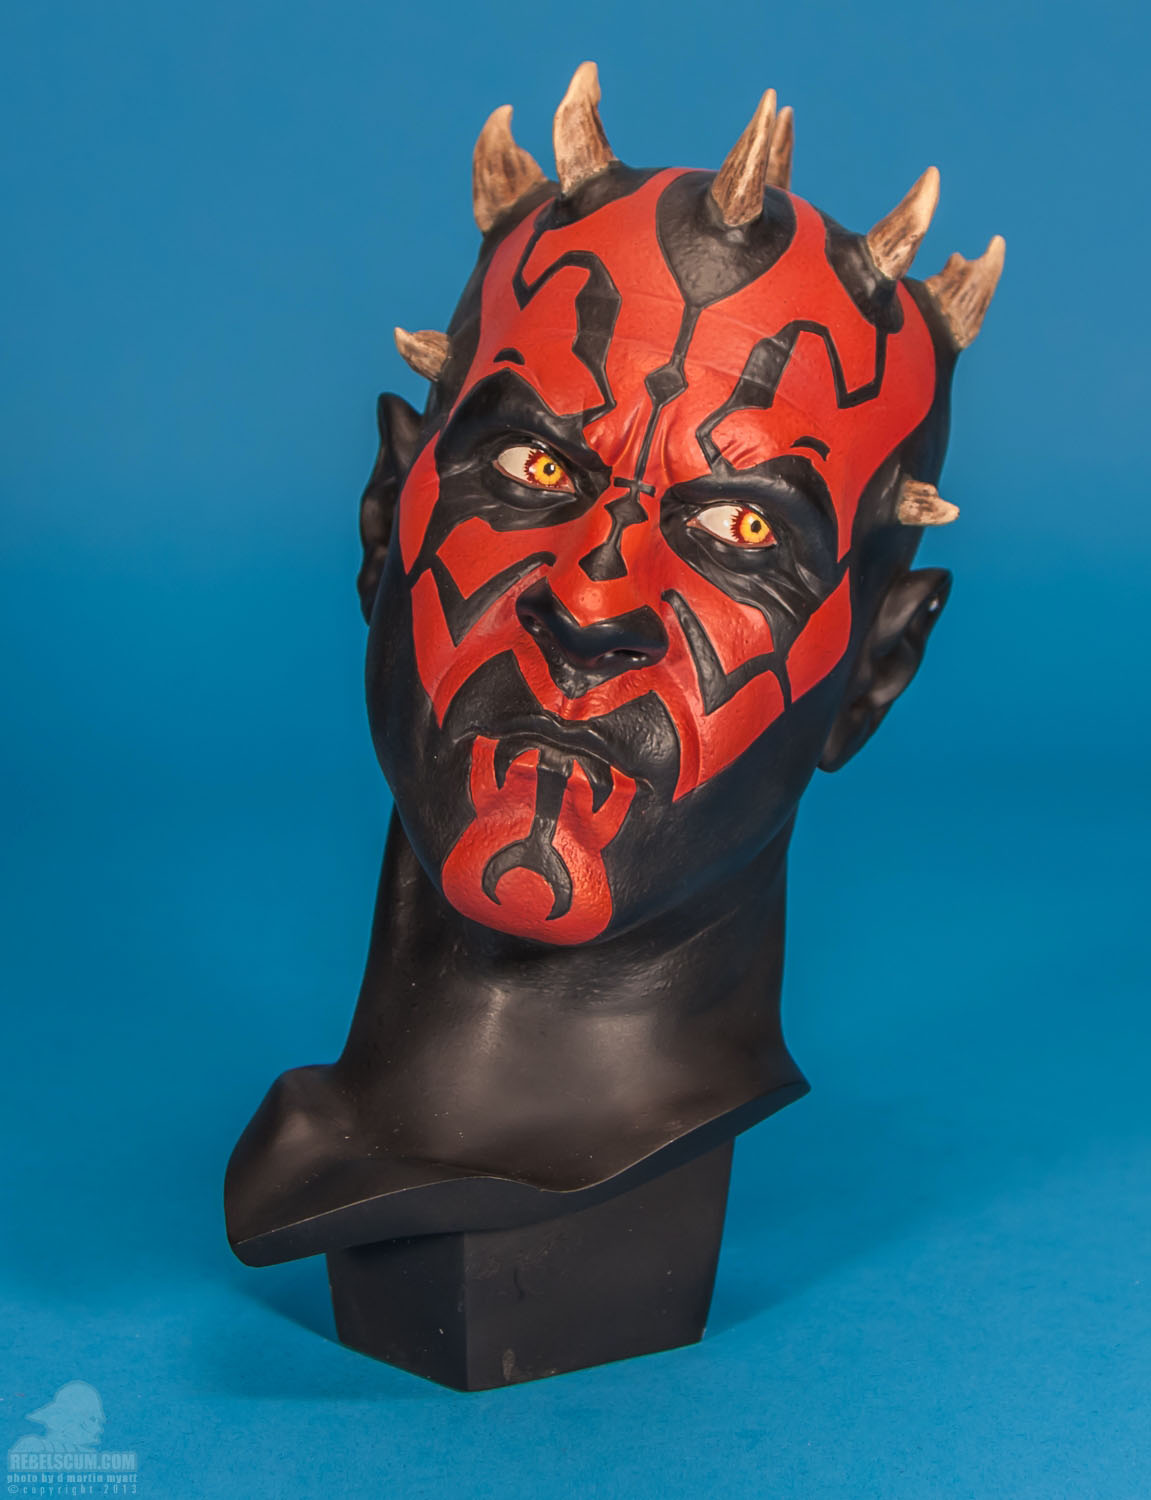 Darth_Maul_Legendary_Scale_Figure_Sideshow_Collectibles-19.jpg